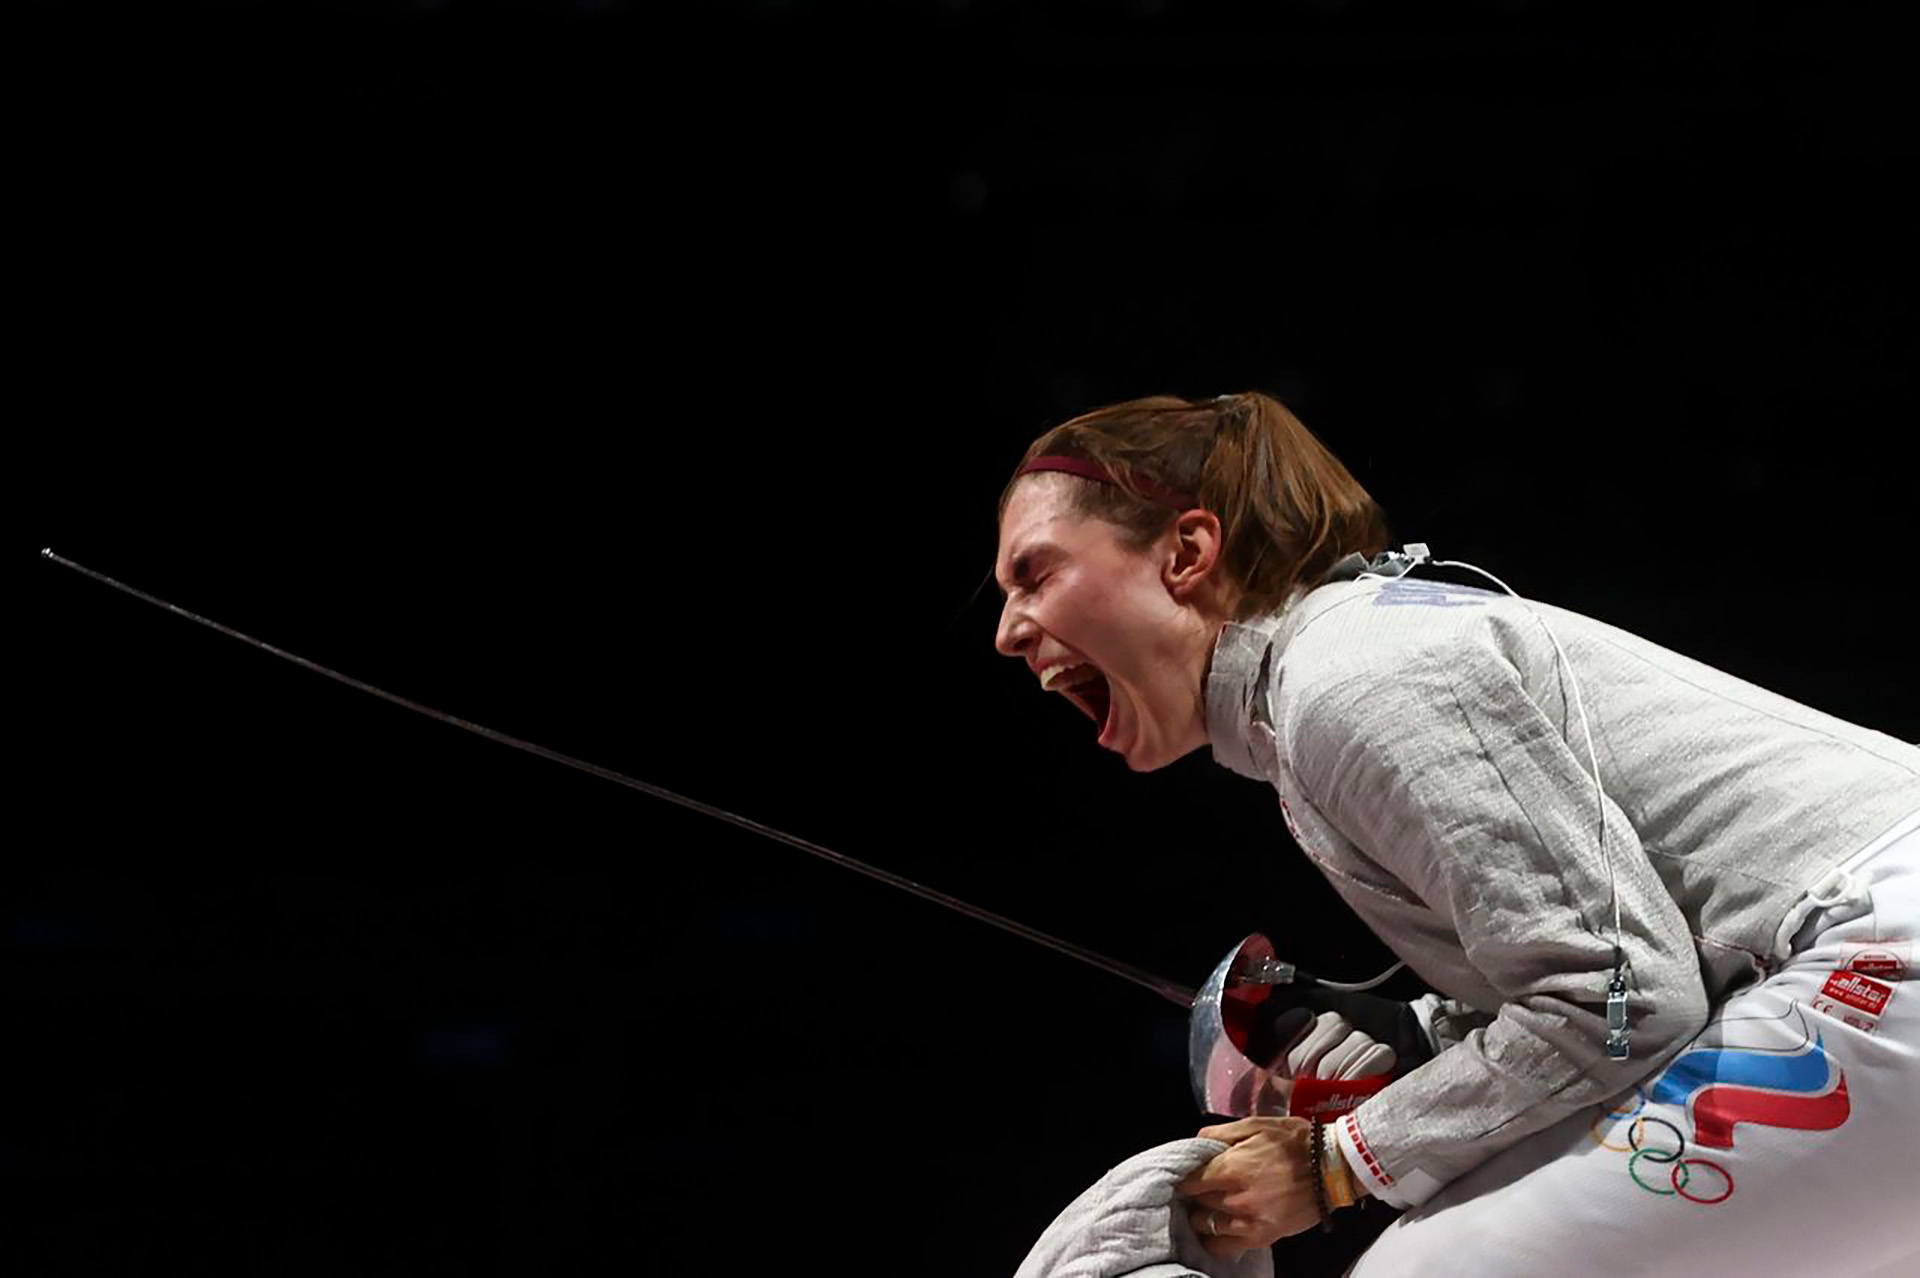 Fencing on alert: strong statement against the inclusion of Russians and Belarusians